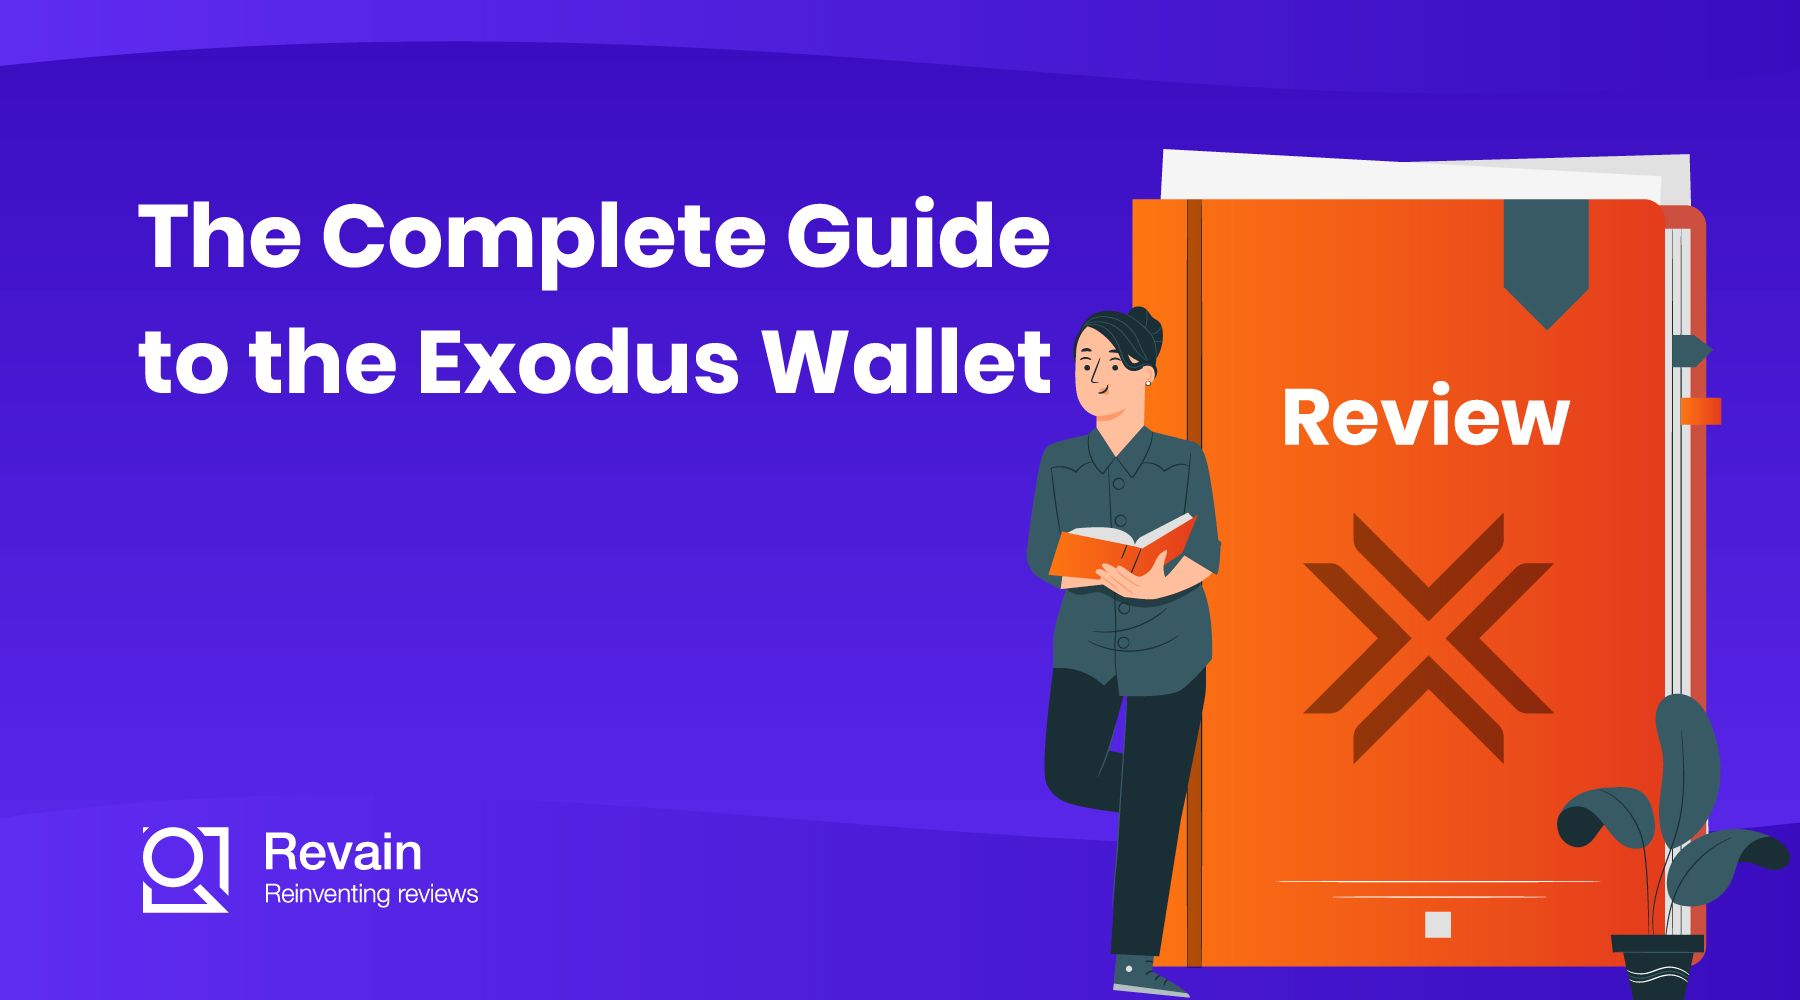 The Complete Guide to the Exodus Wallet